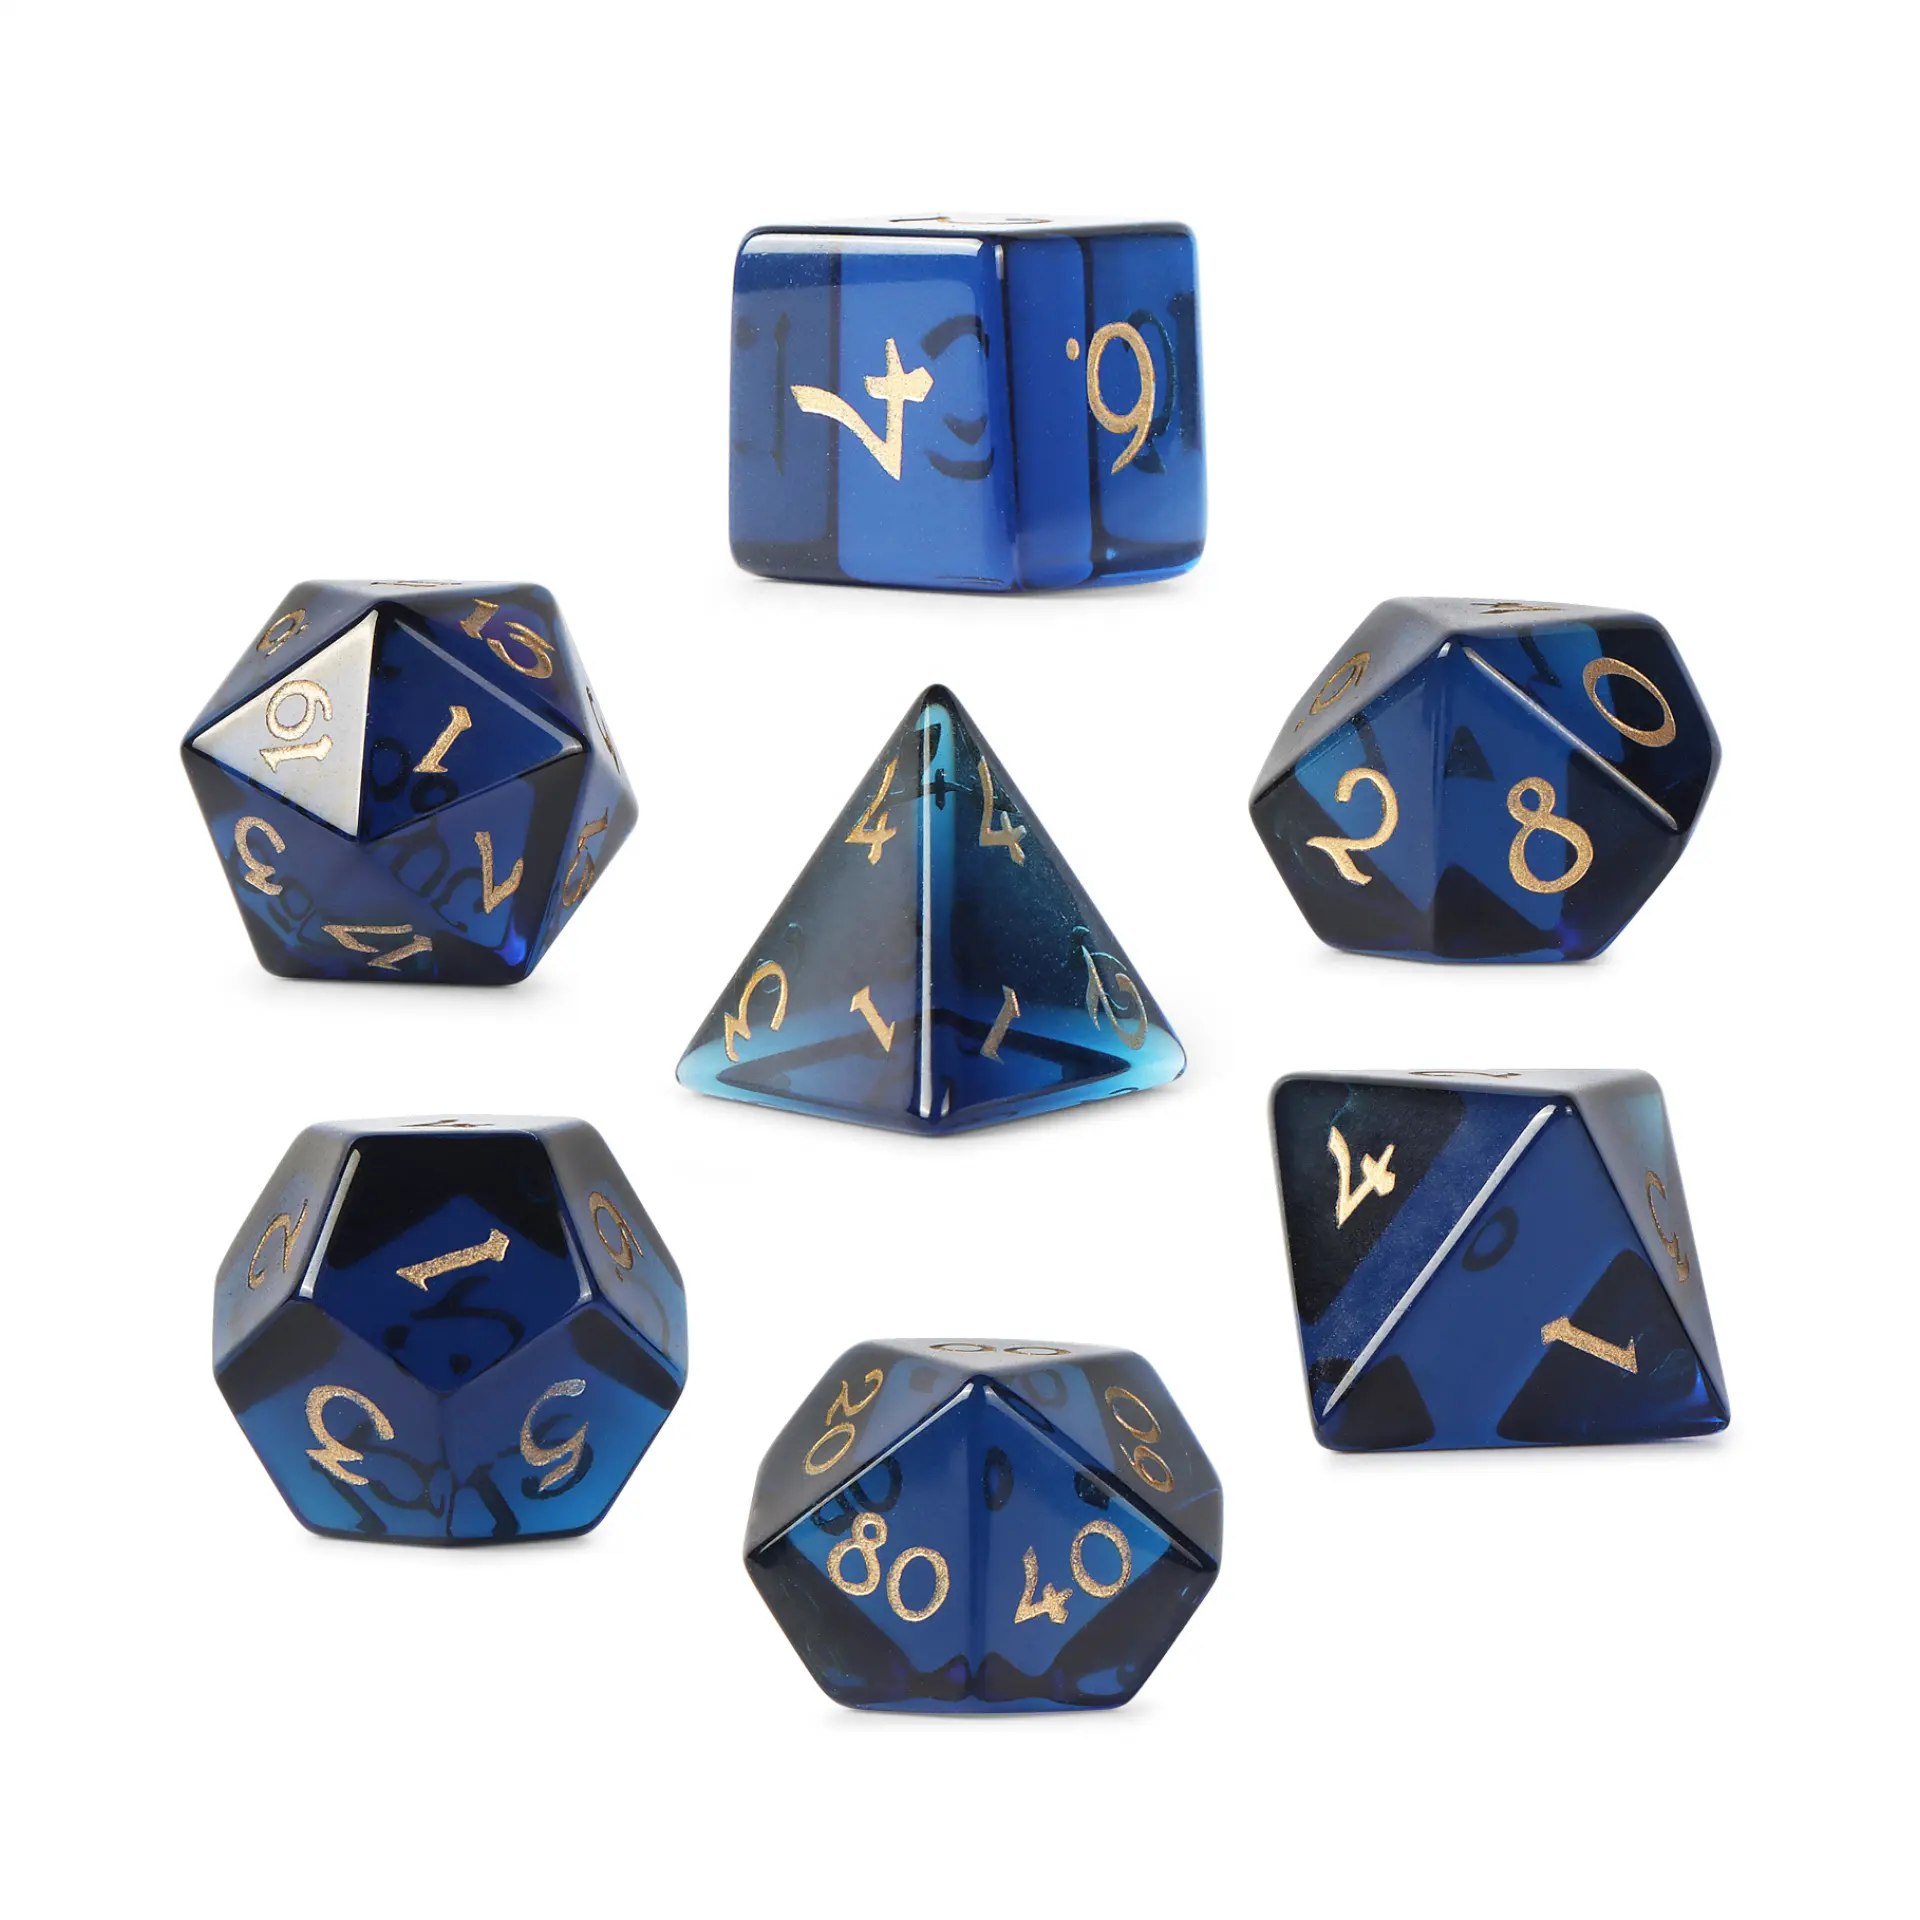 Wholesale Handmade Gemstone Clarity Crystal Blue Glass Dice Set Craft Spiritual Collection Decor Game for Dungeons Dragon